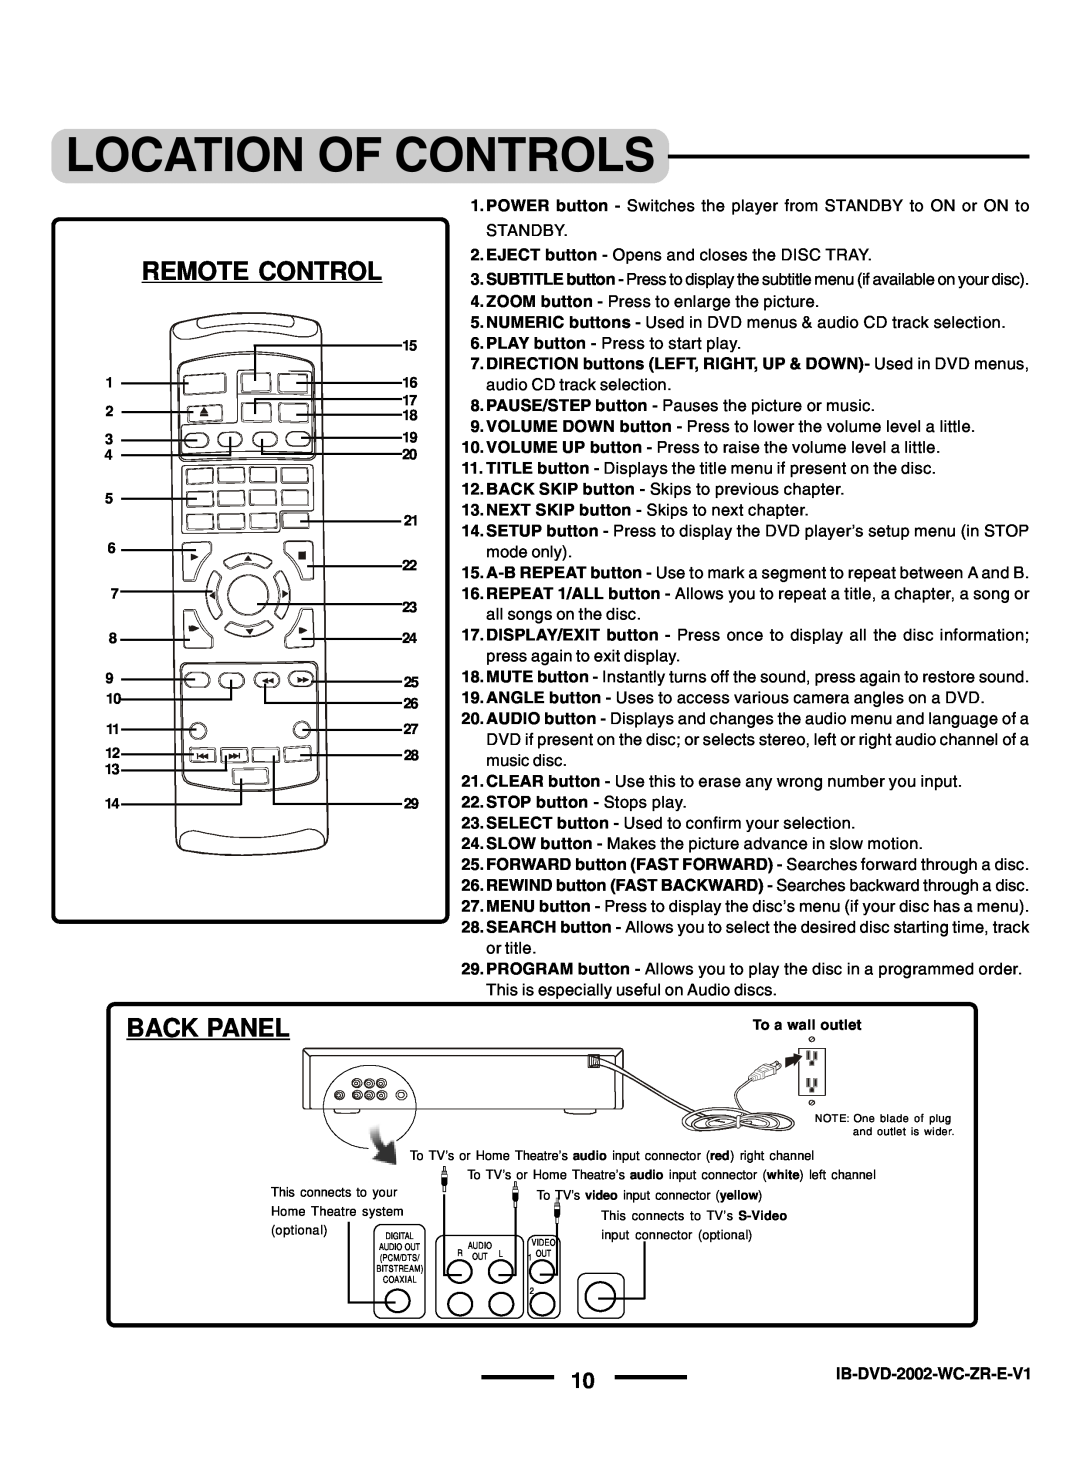 Lenoxx Electronics DVD-2002 instruction manual Remote Control, Back Panel, Location Of Controls, music disc 